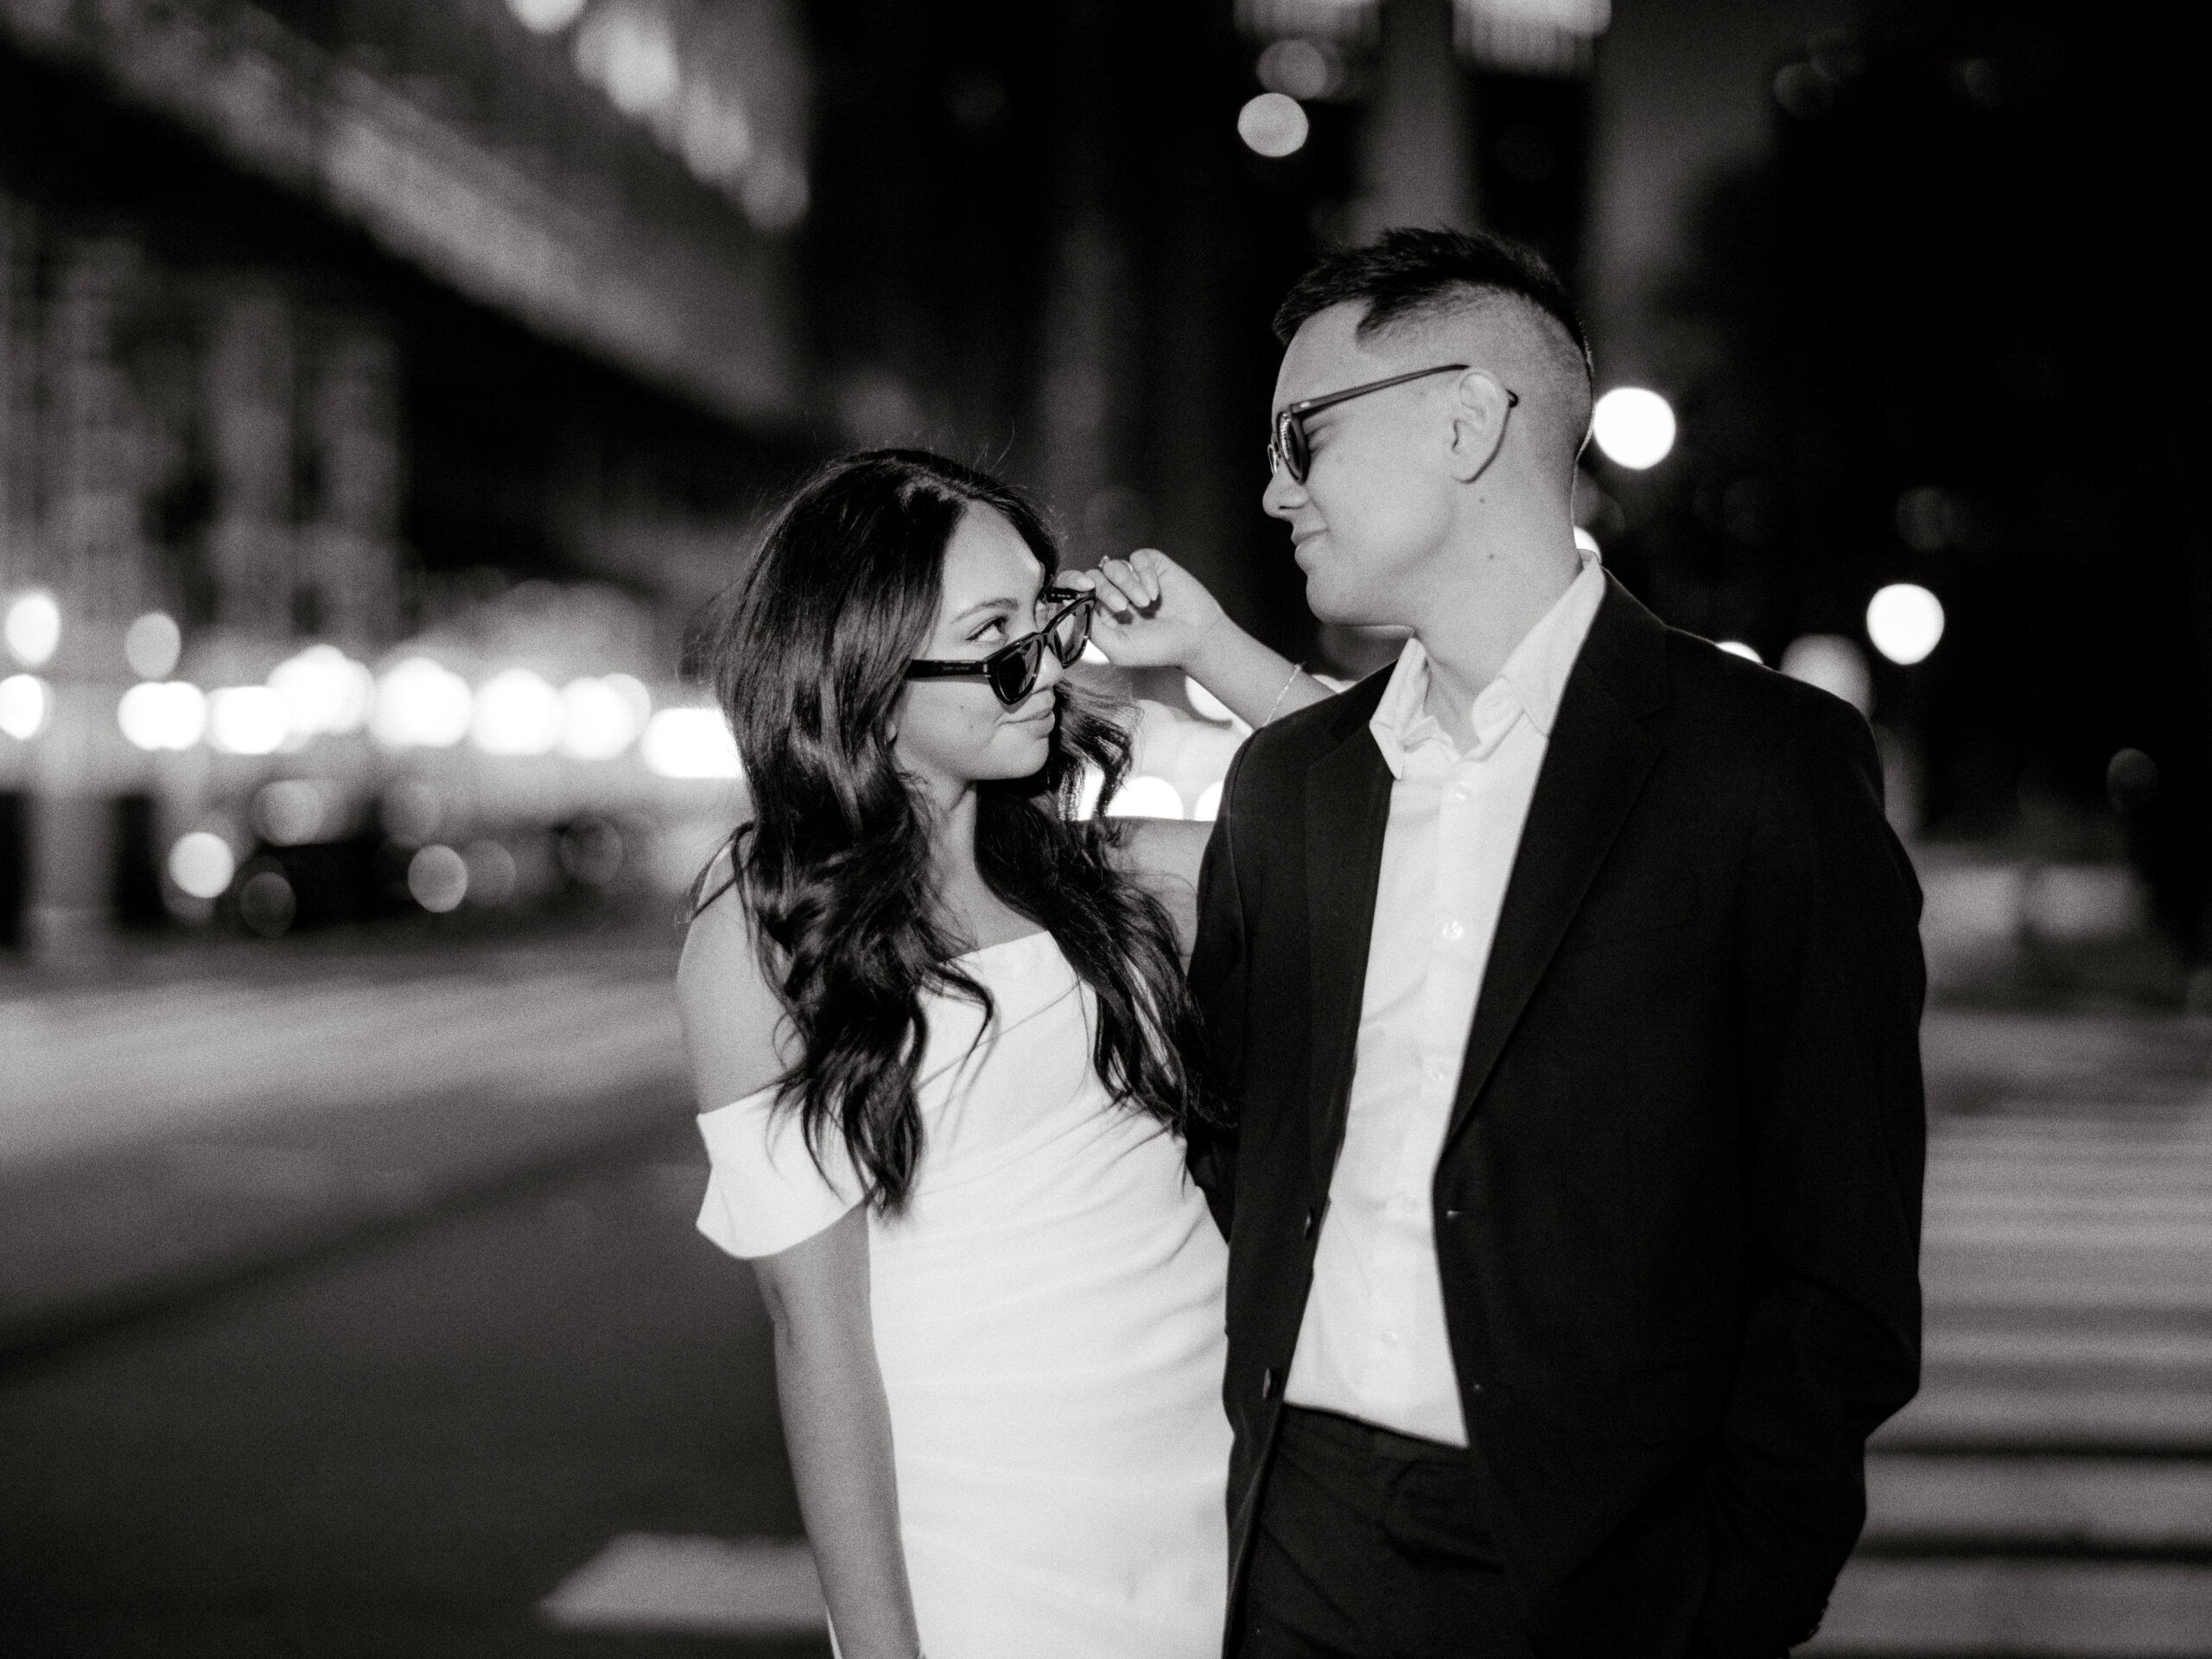 Black and white image of the engaged couple in New York. Engagement photos image by Jenny Fu Studio